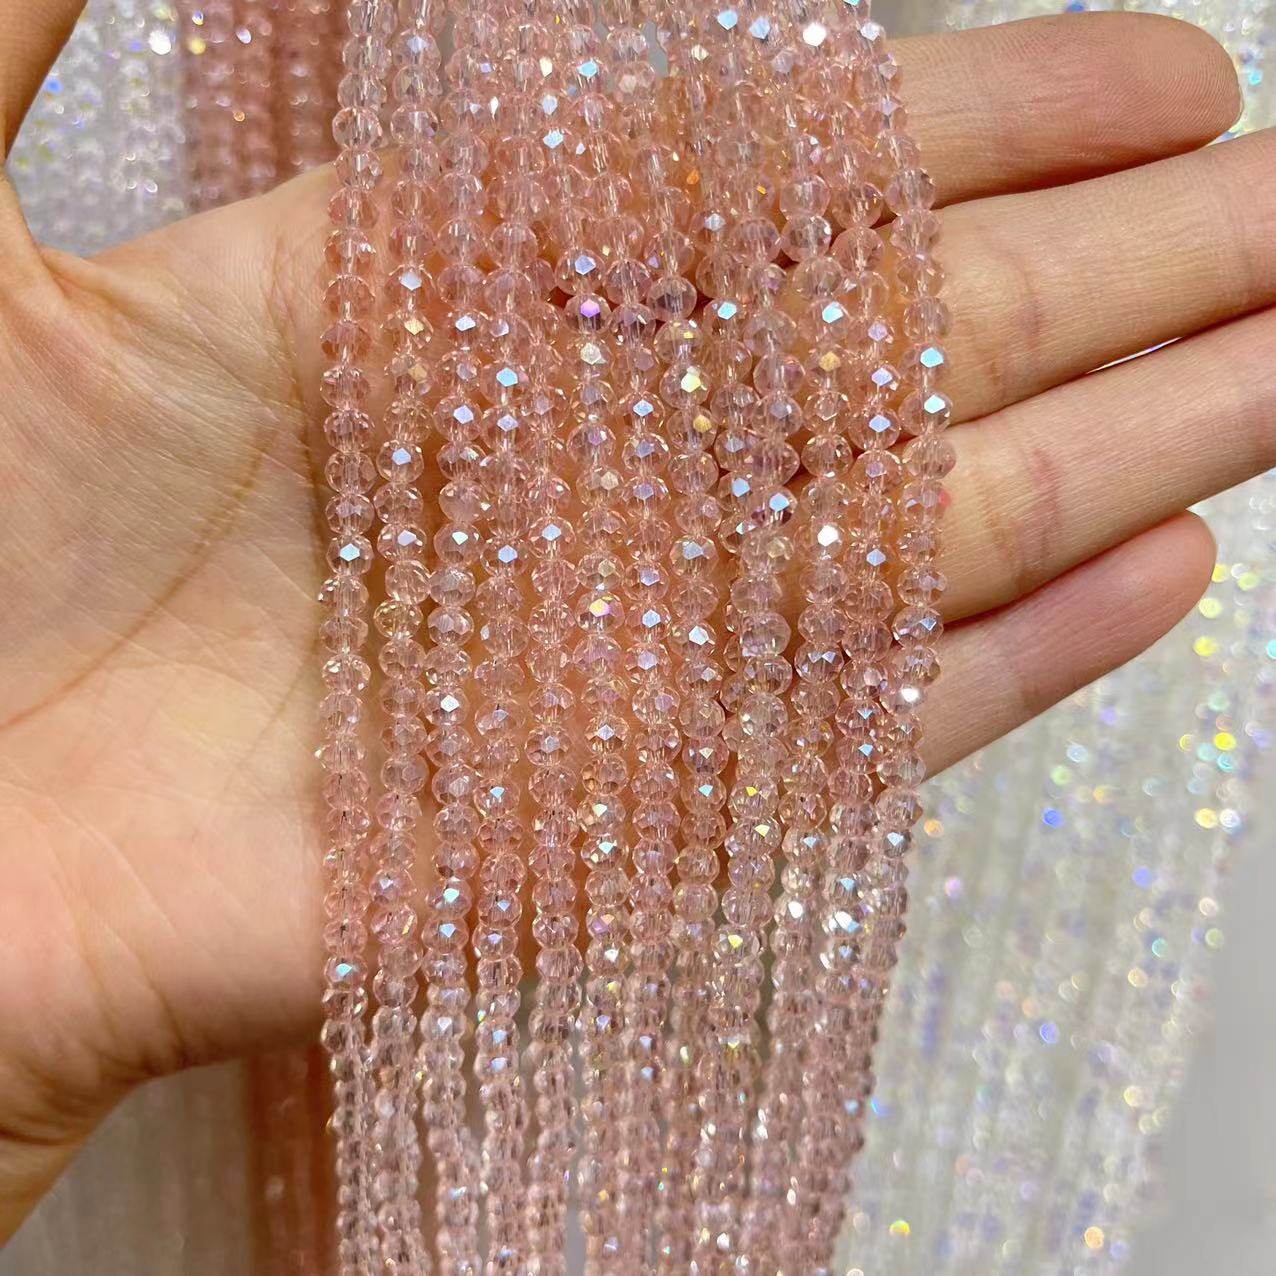 10Pcs Common Quality Man Made Sparkly Crystal Glass Beads 17"Strand for DIY